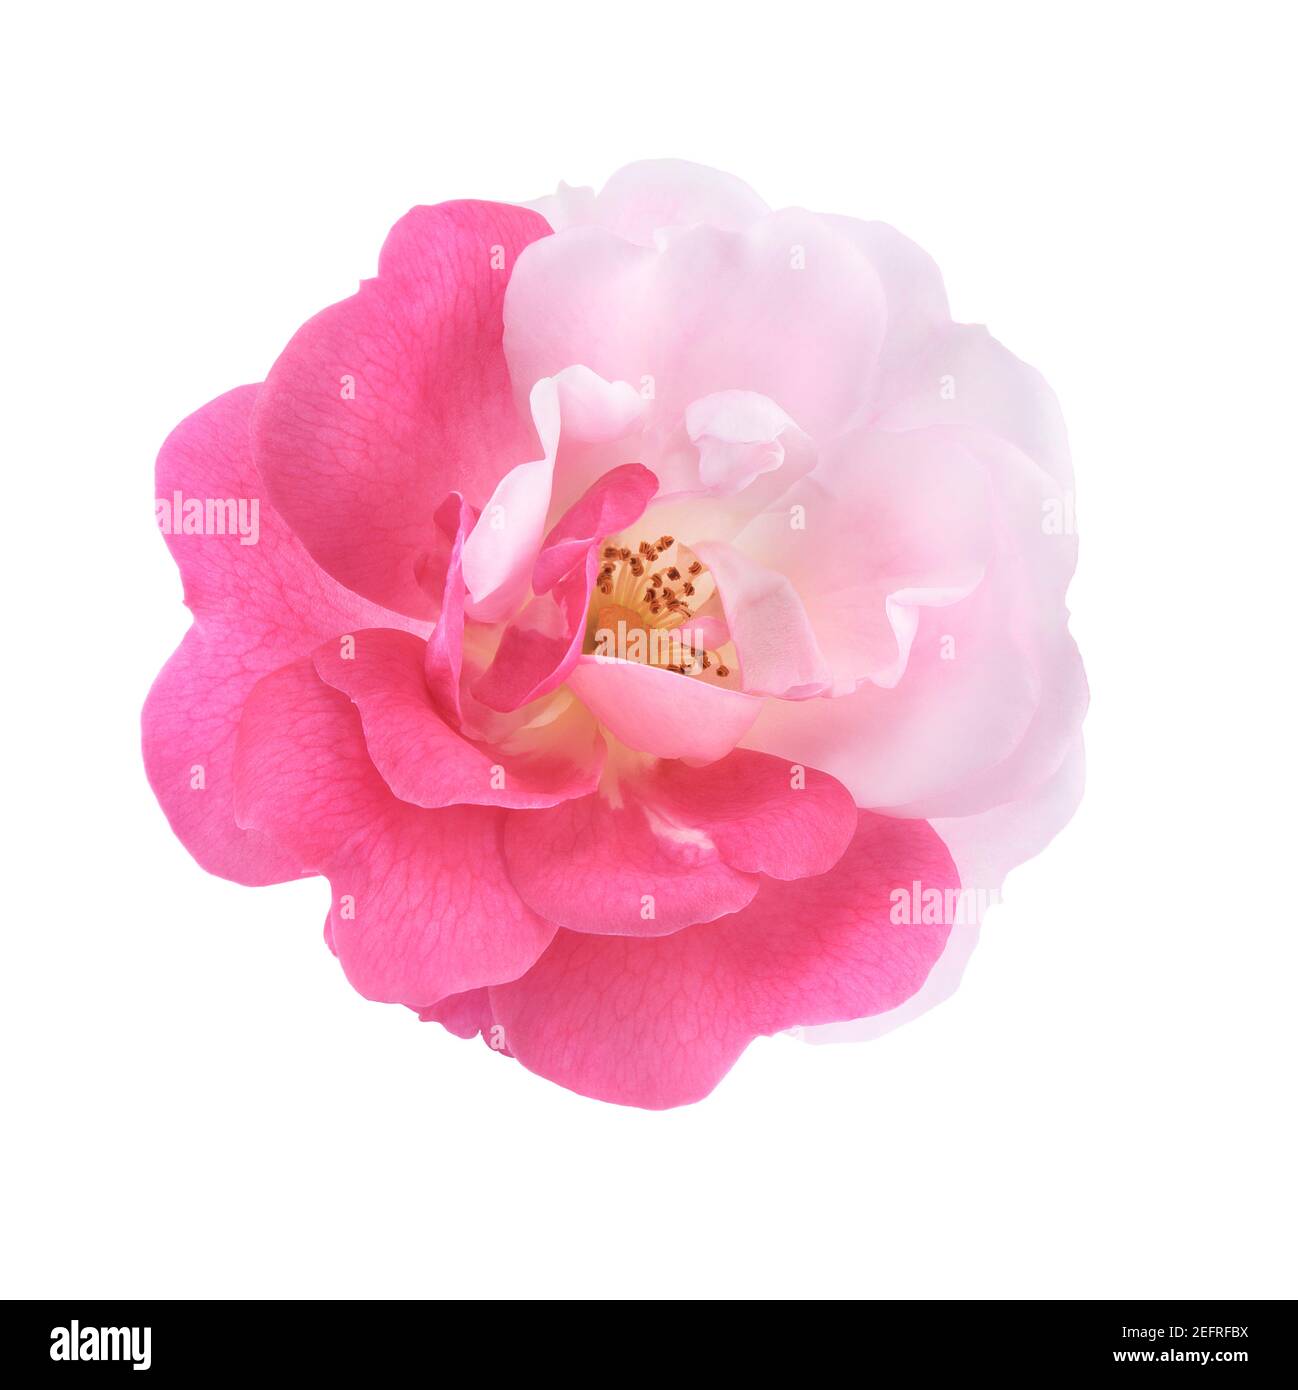 Damask Rose bi-color flower with half pink half white petals, artistic front view closeup of an open sporting flower, isolated on white studio backgro Stock Photo